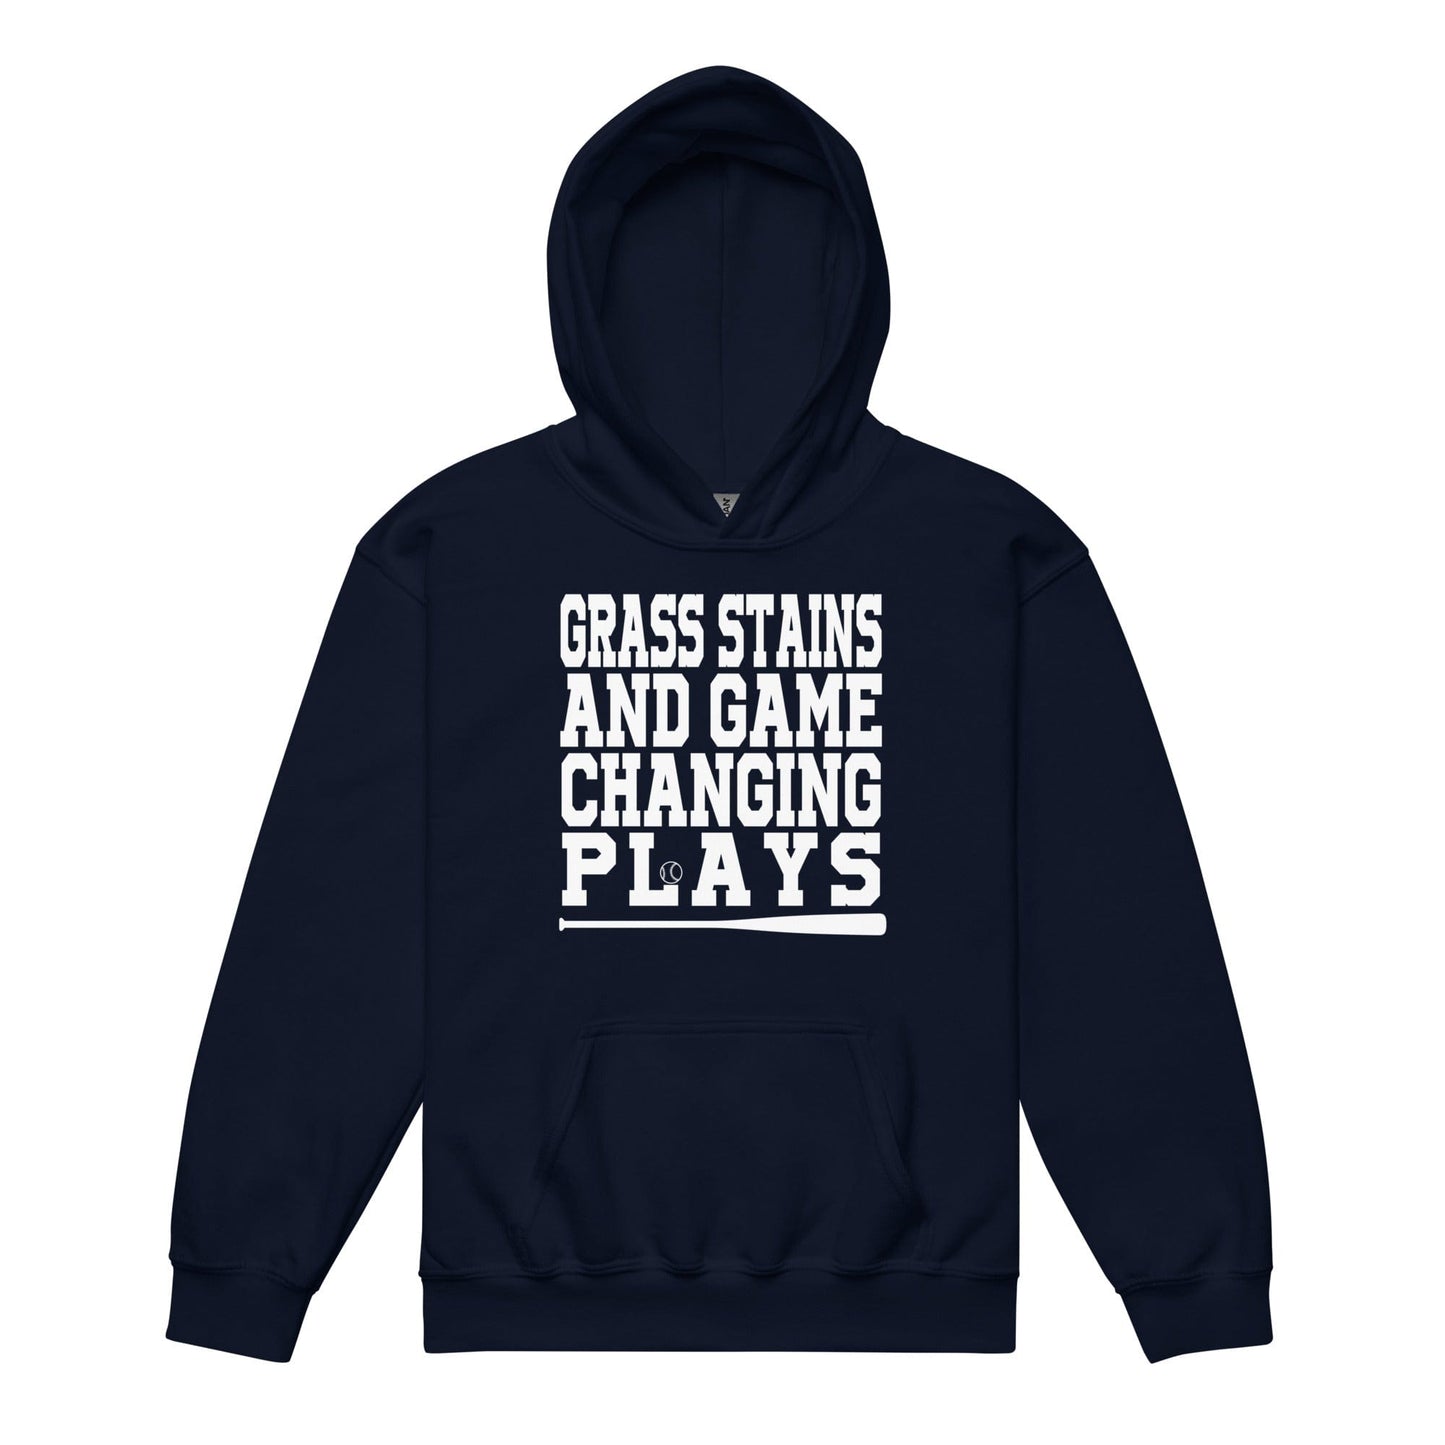 Grass Stains And Game Changing Plays - Youth Hoodie